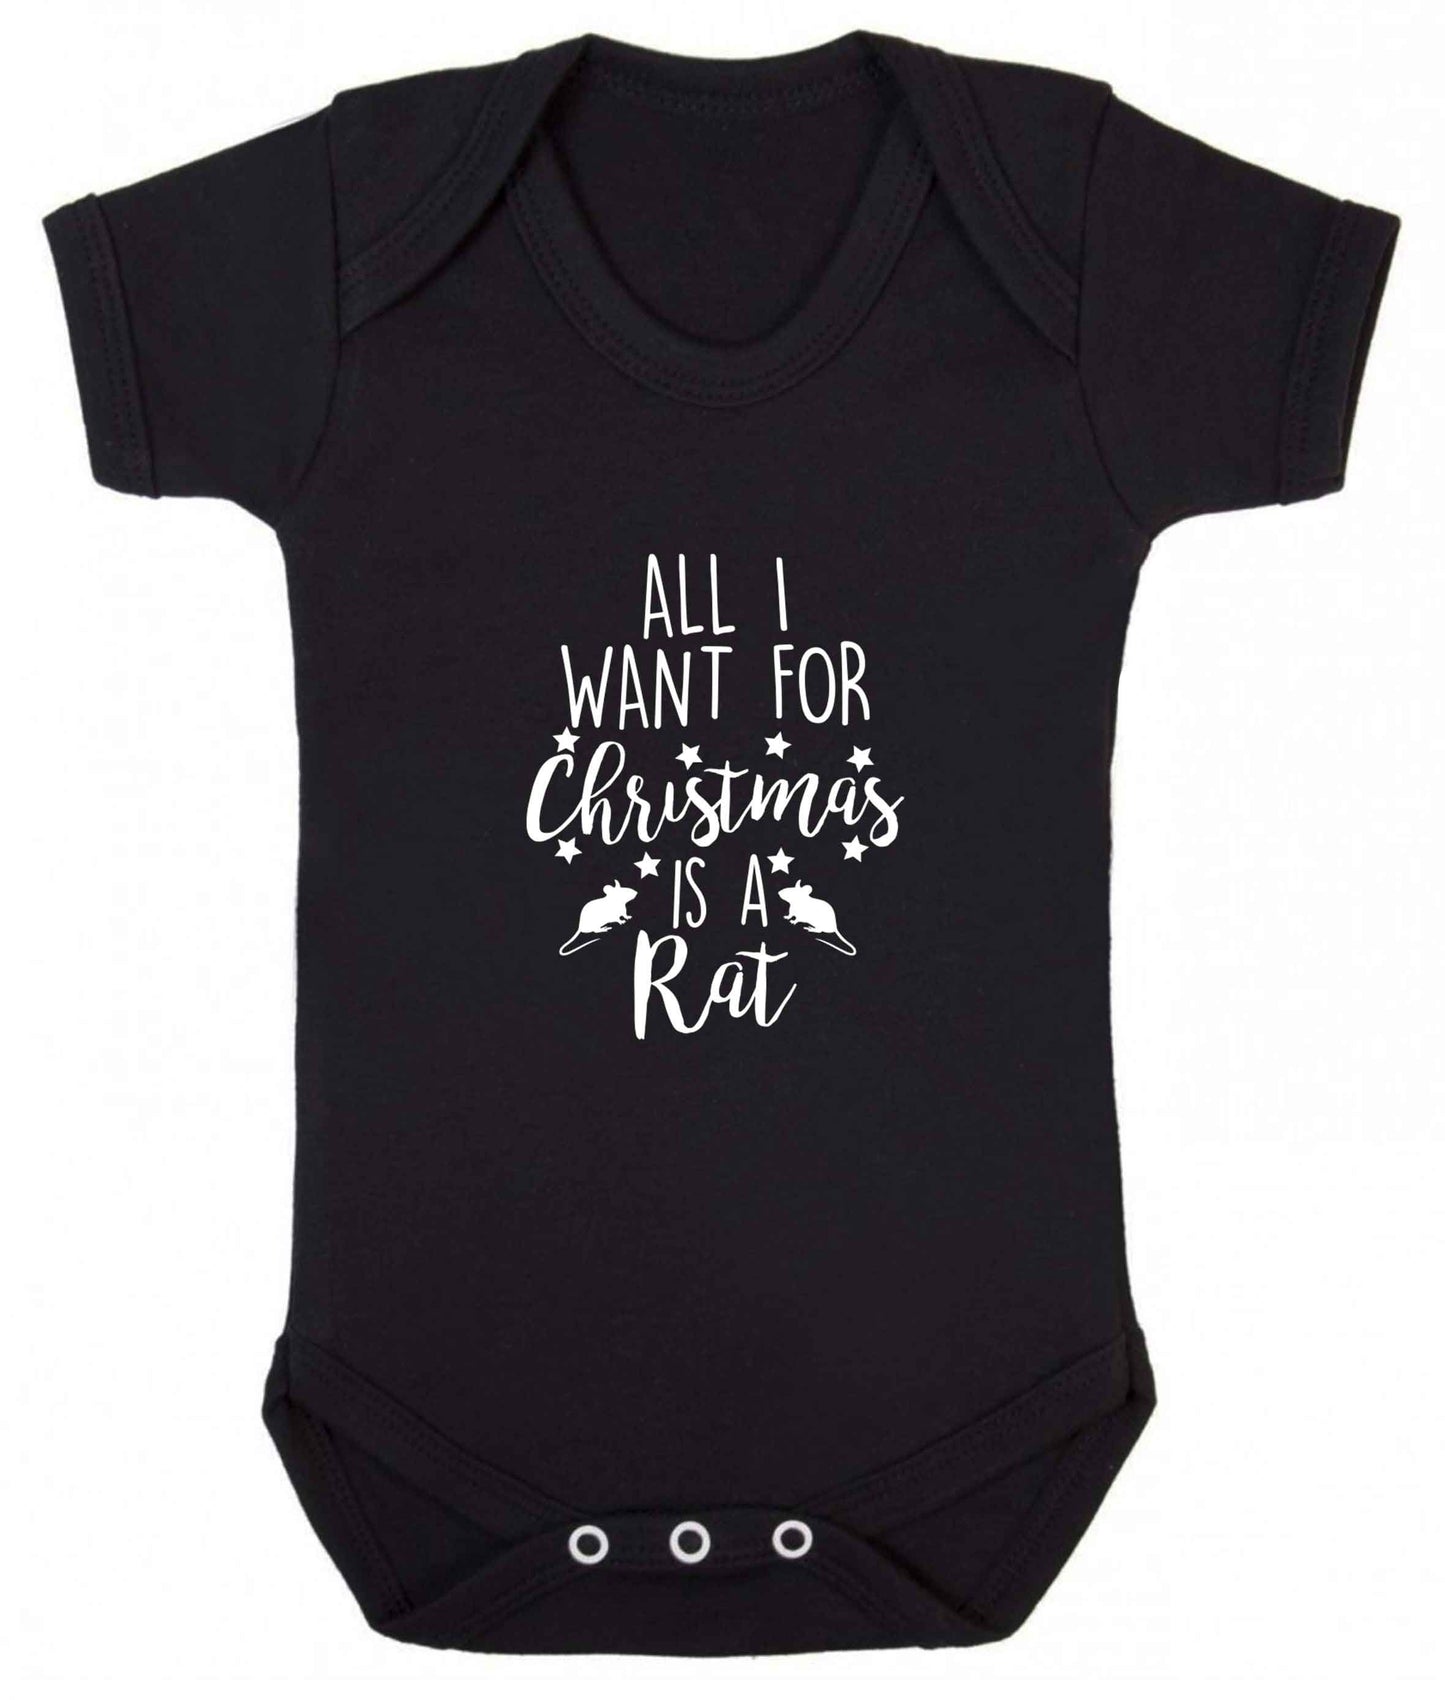 All I want for Christmas is a rat baby vest black 18-24 months